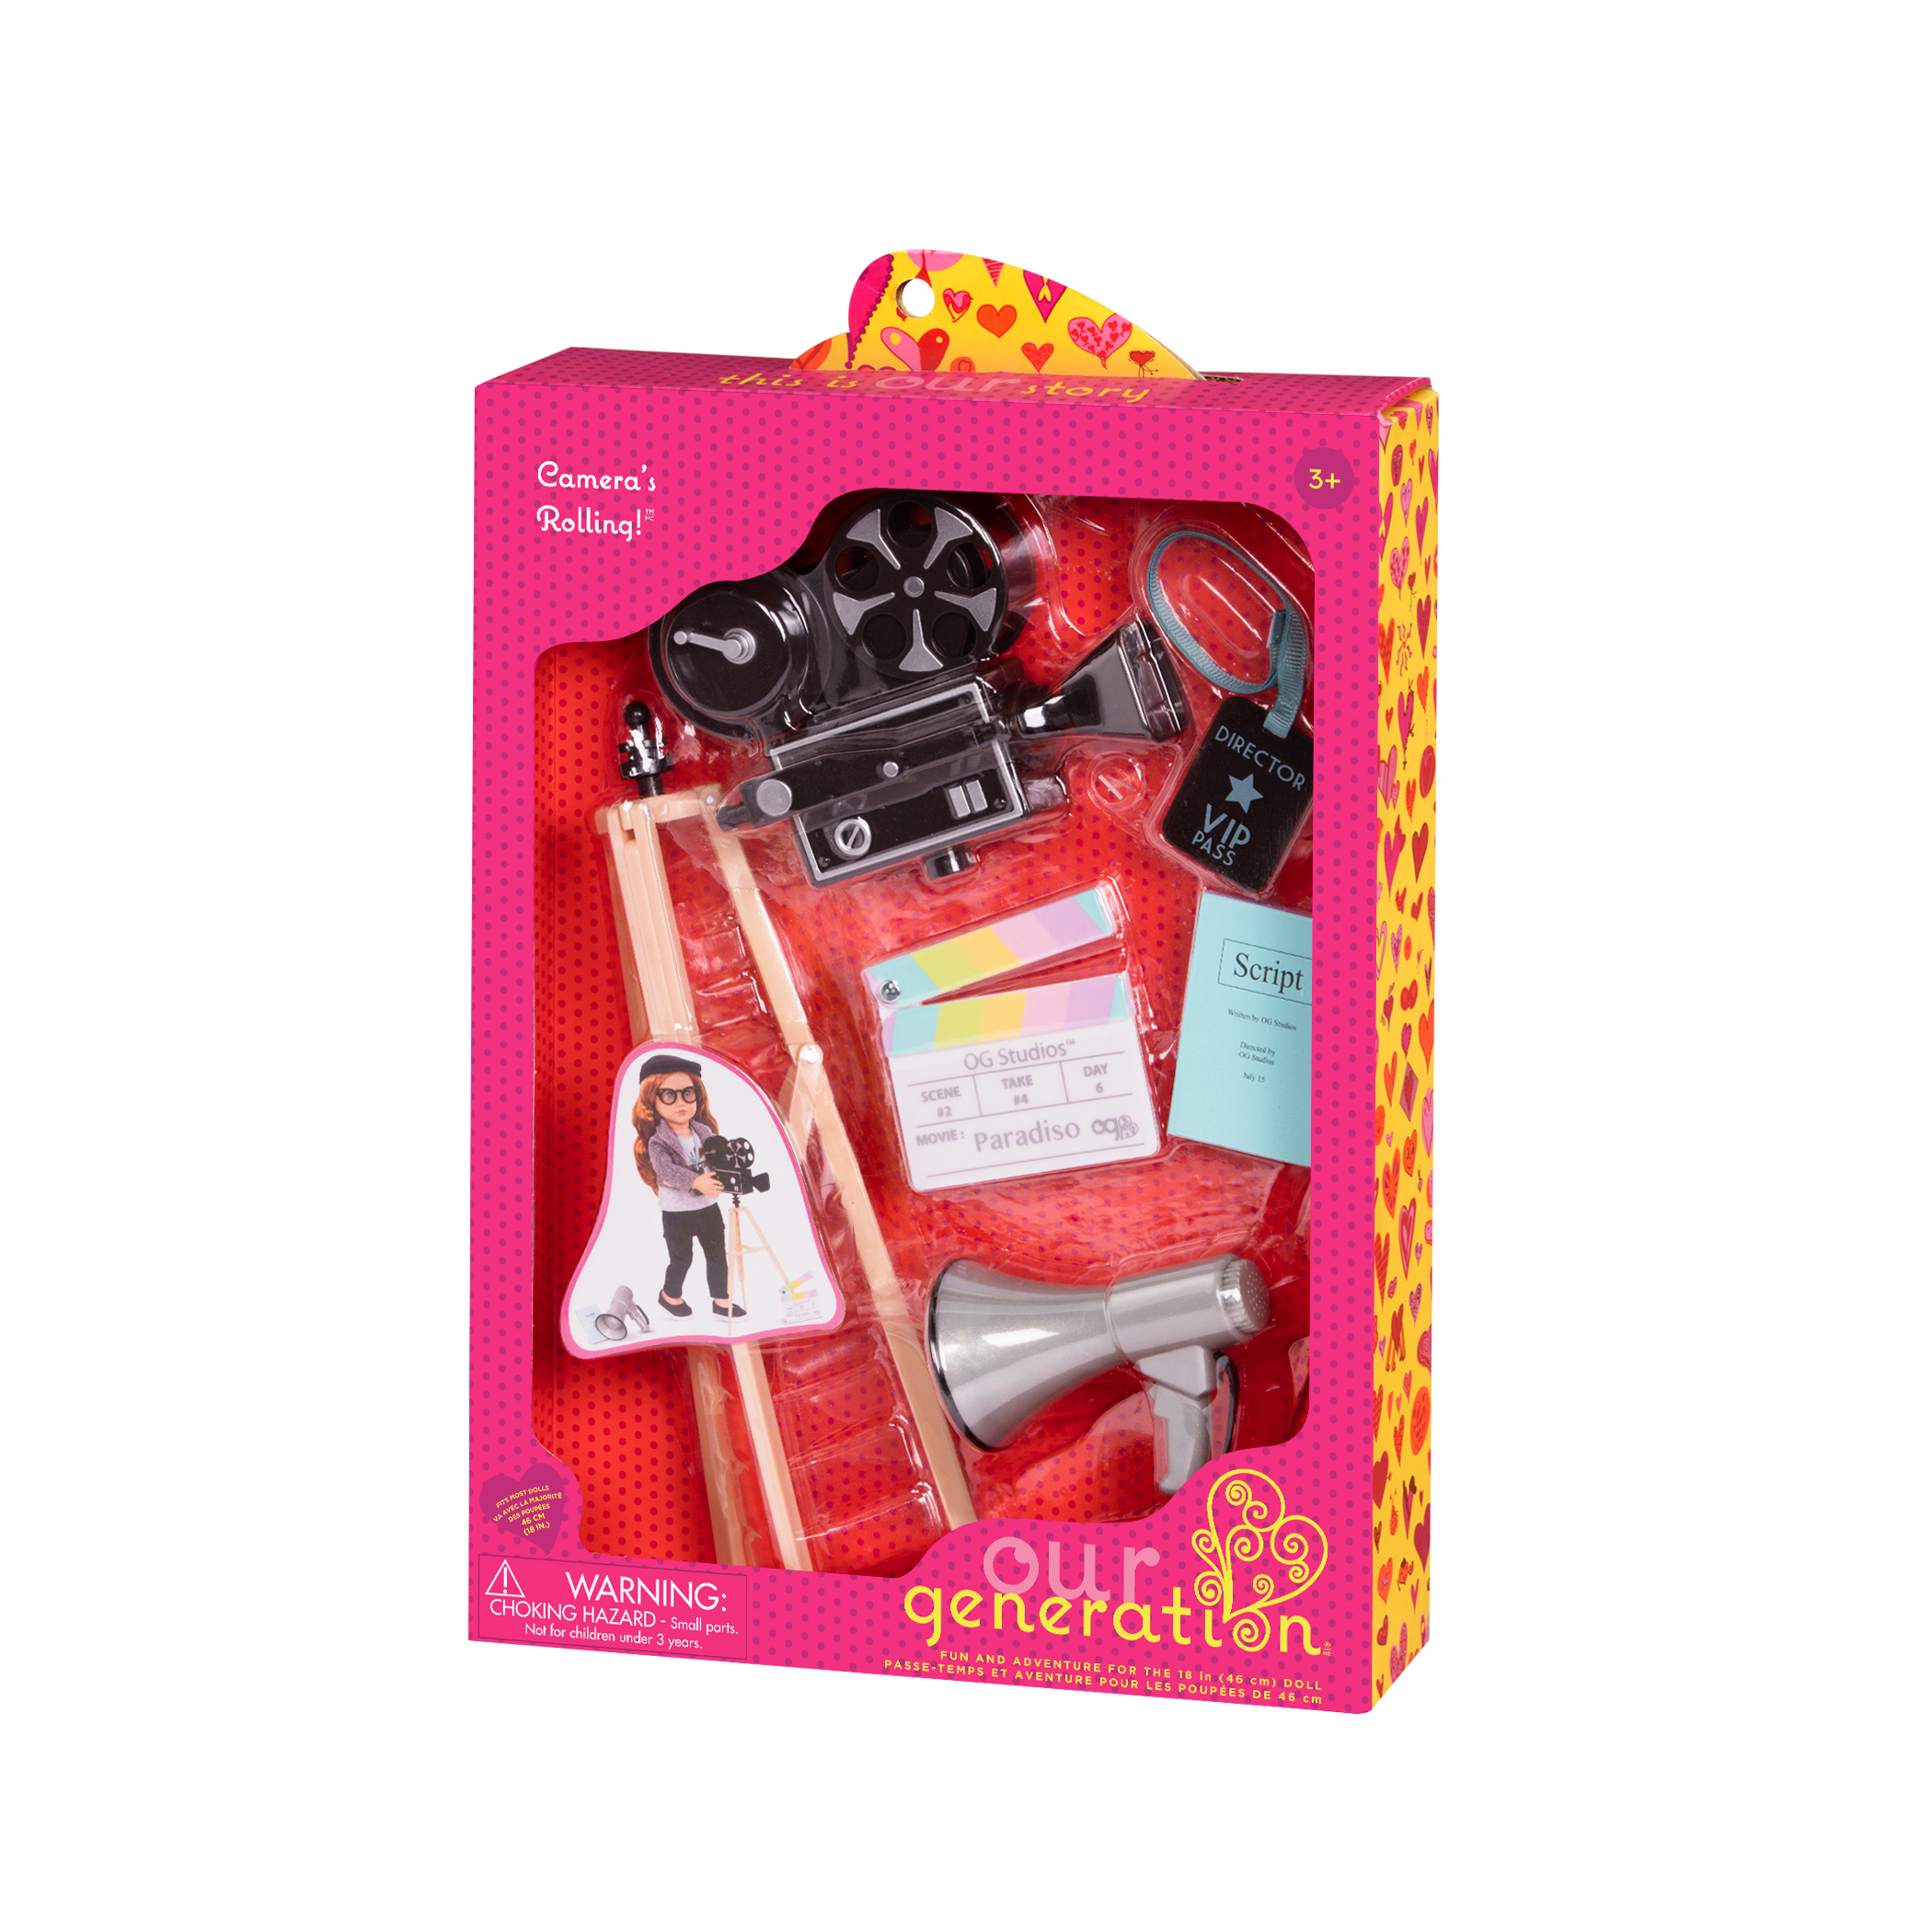 18-inch doll using moviemaker playset